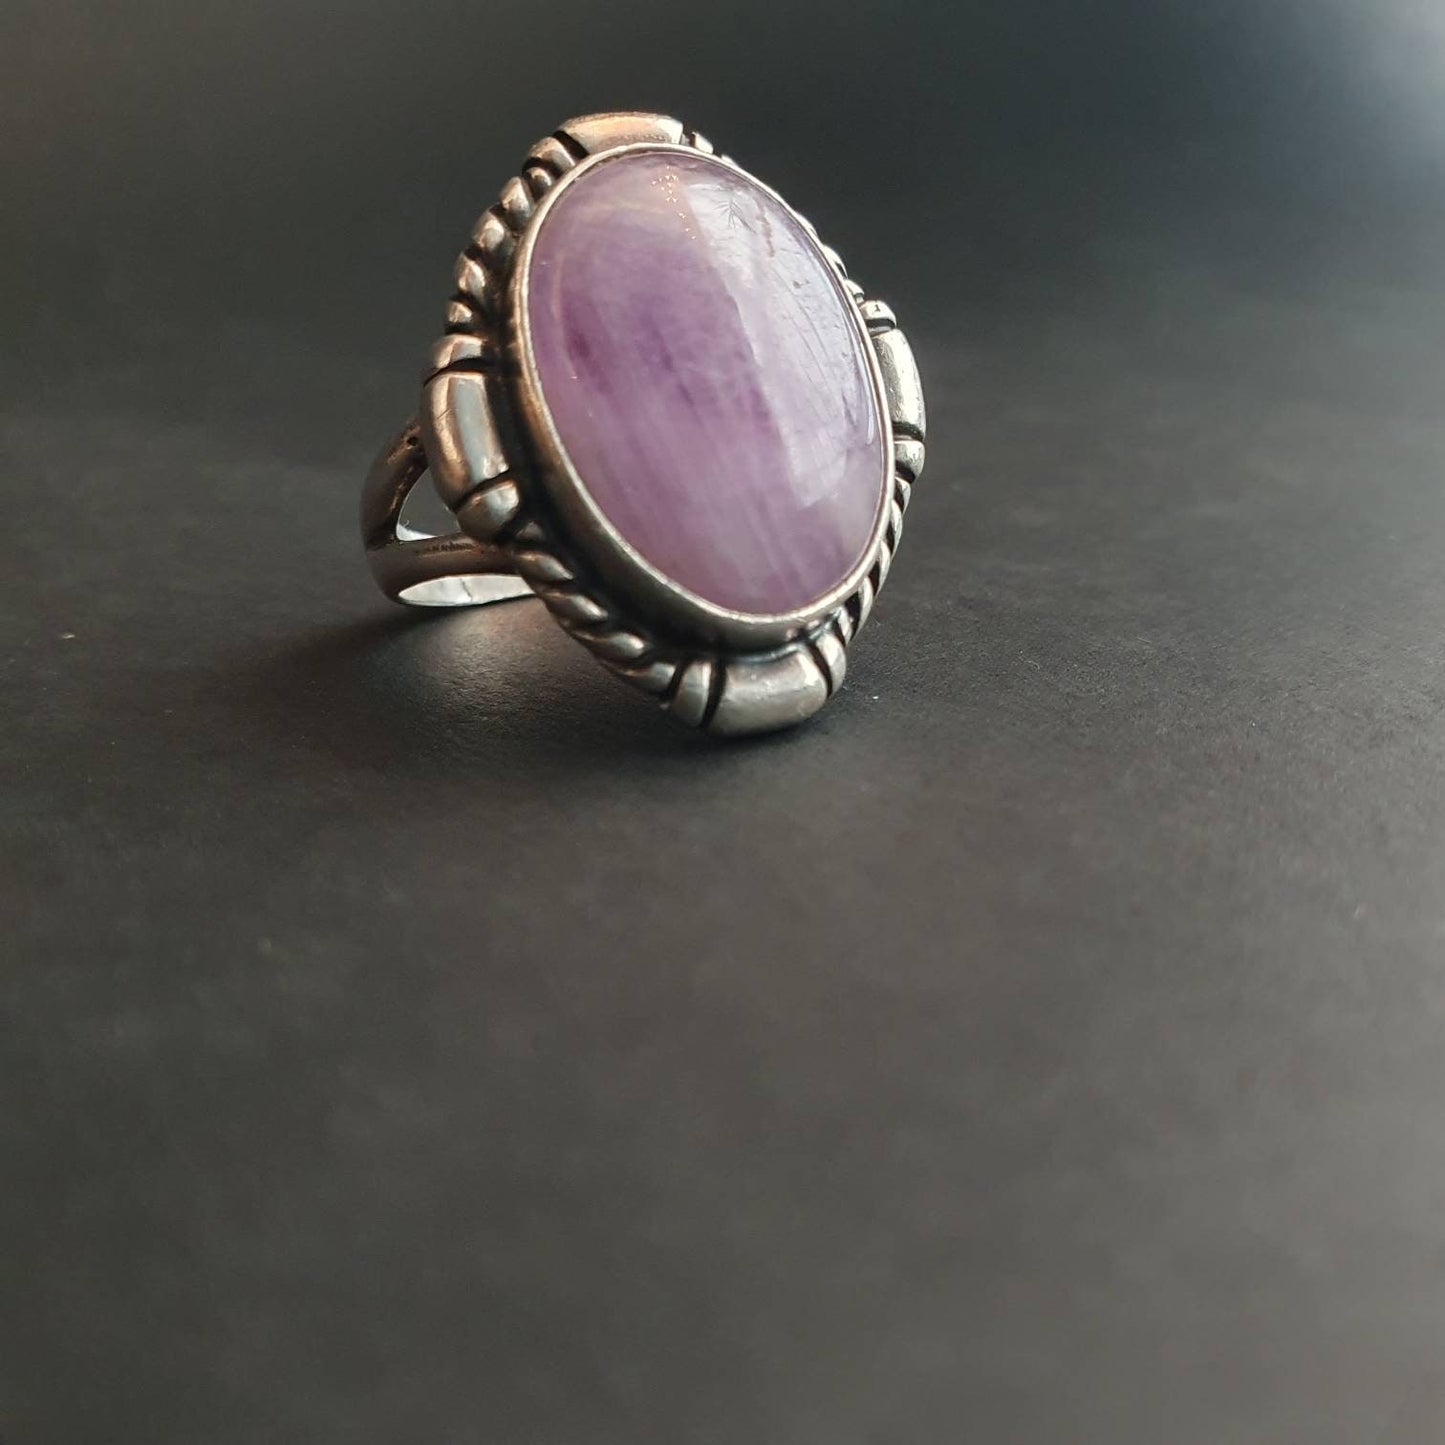 Amethyst ring, sterling silver Statement ring, Chunky ring, ornate ring, British Hallmarked jewellery